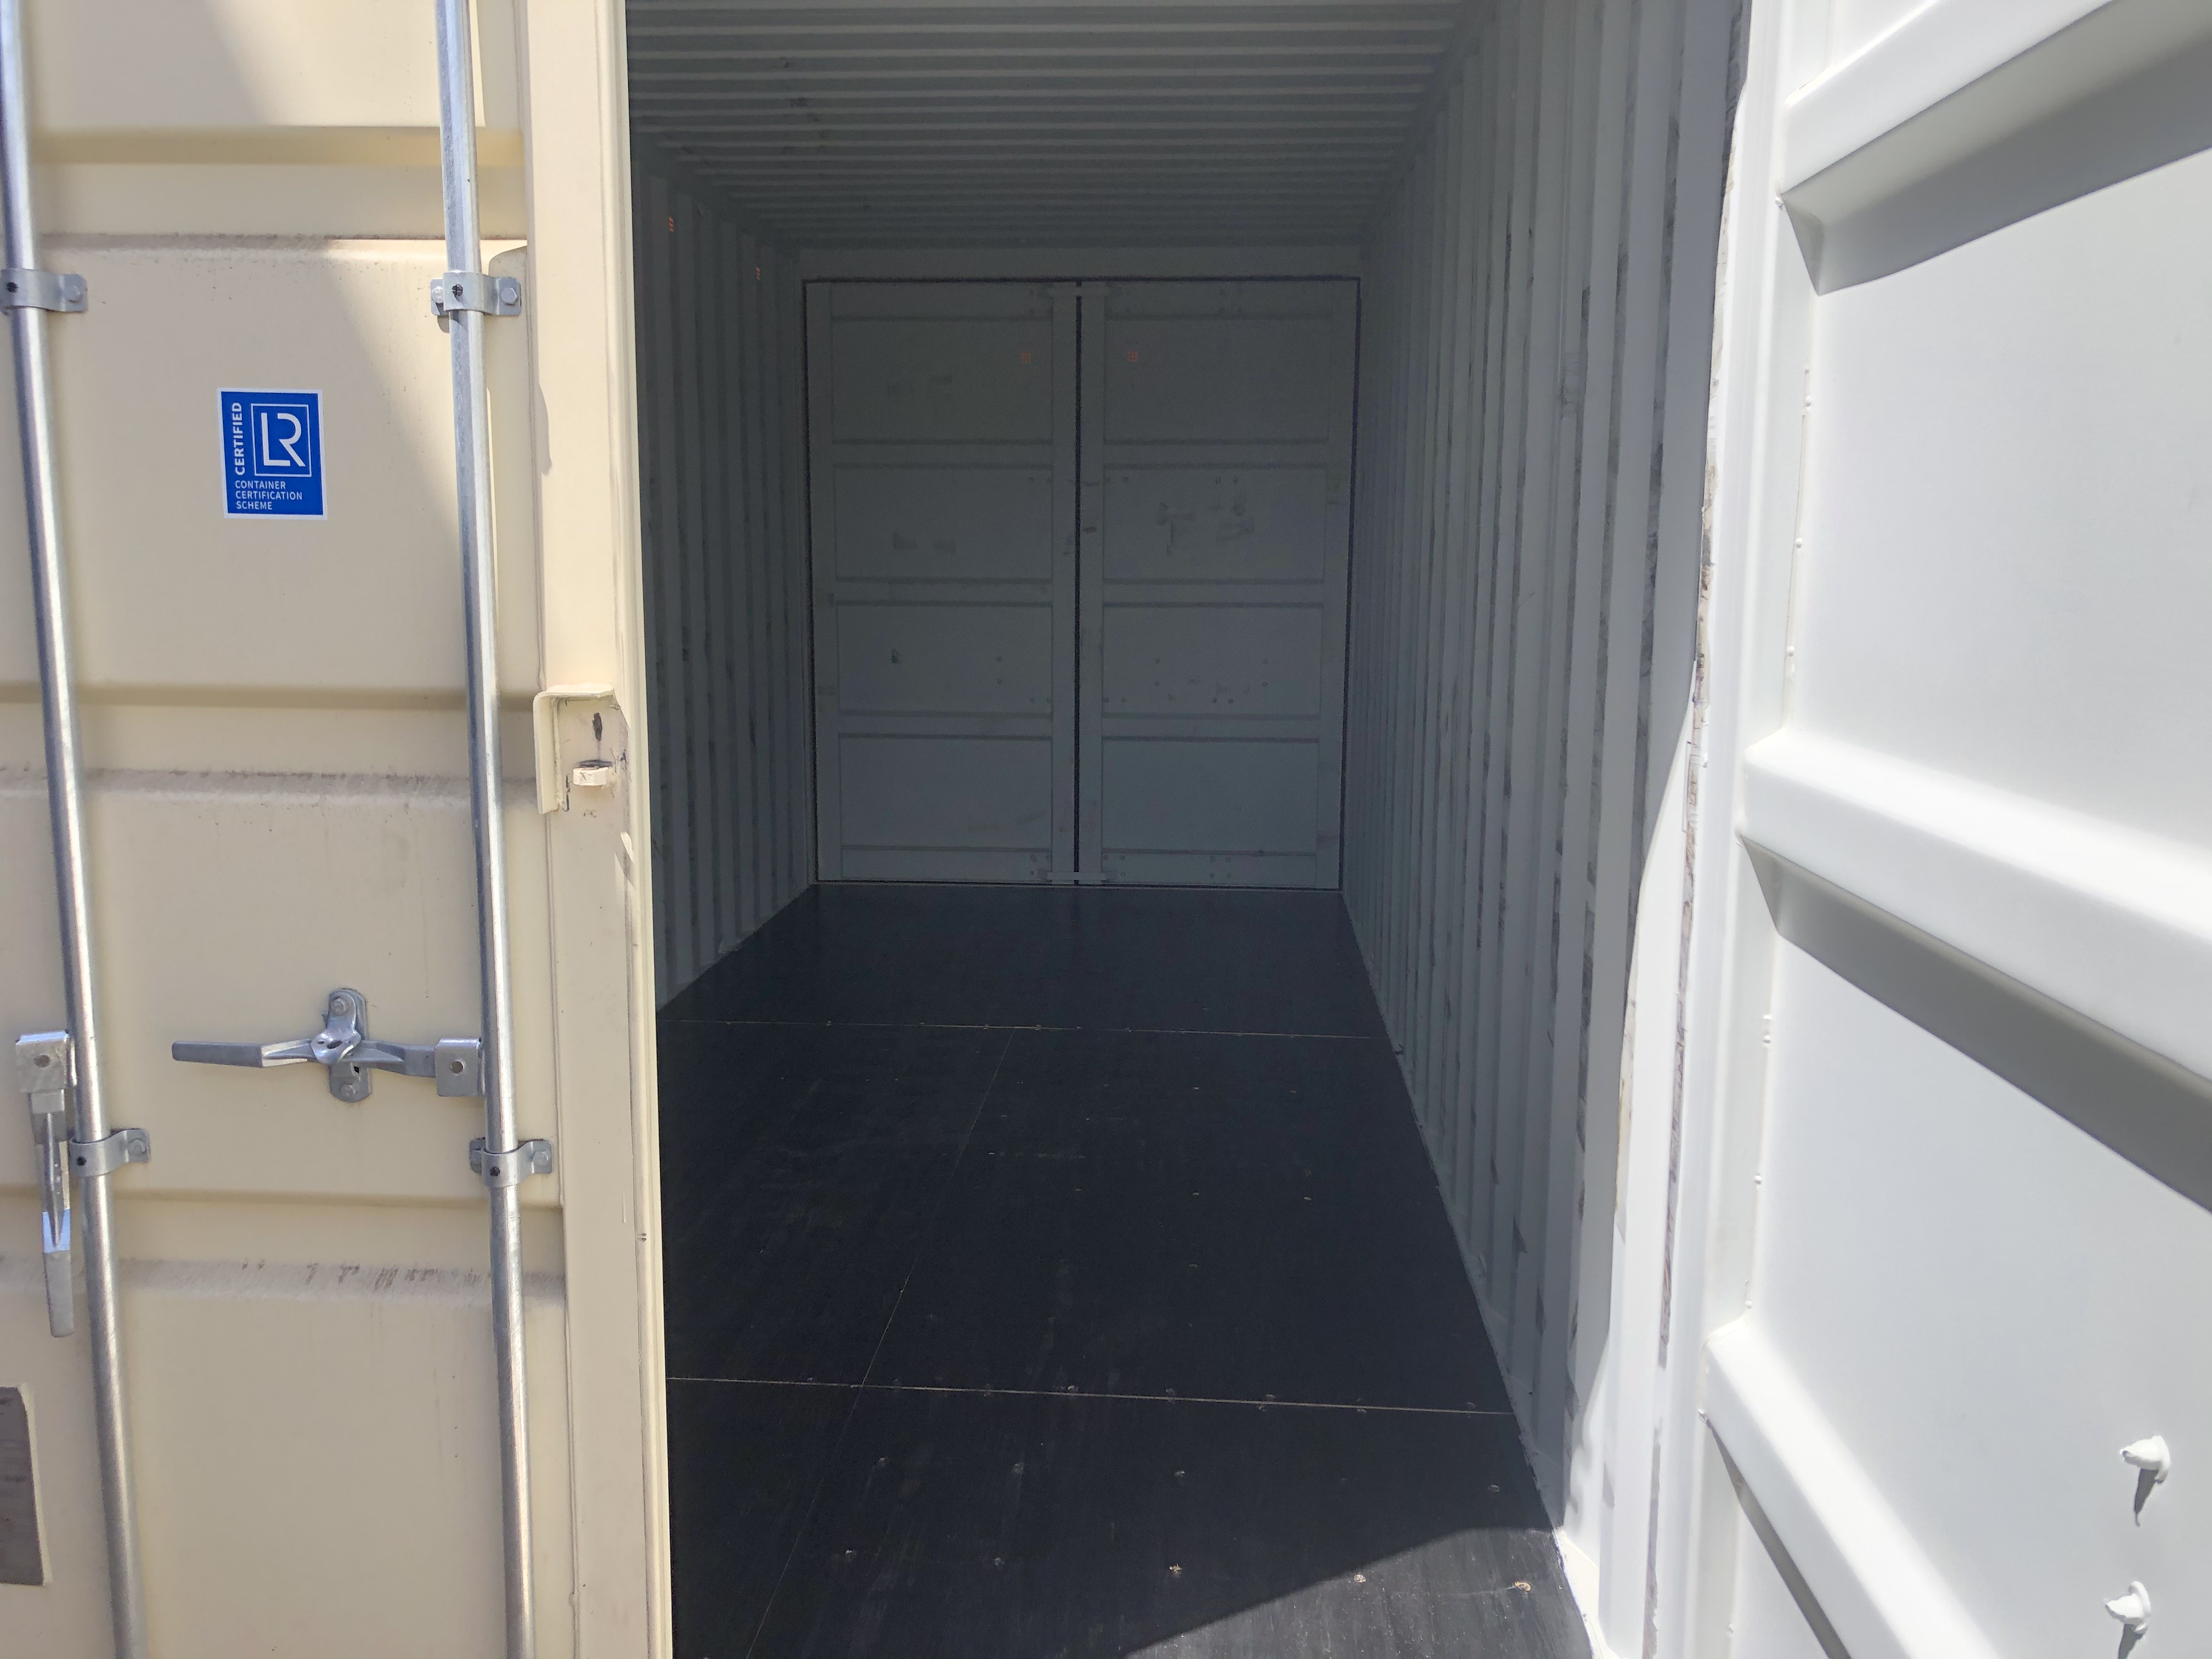 20ft used double door high cube shipping container.